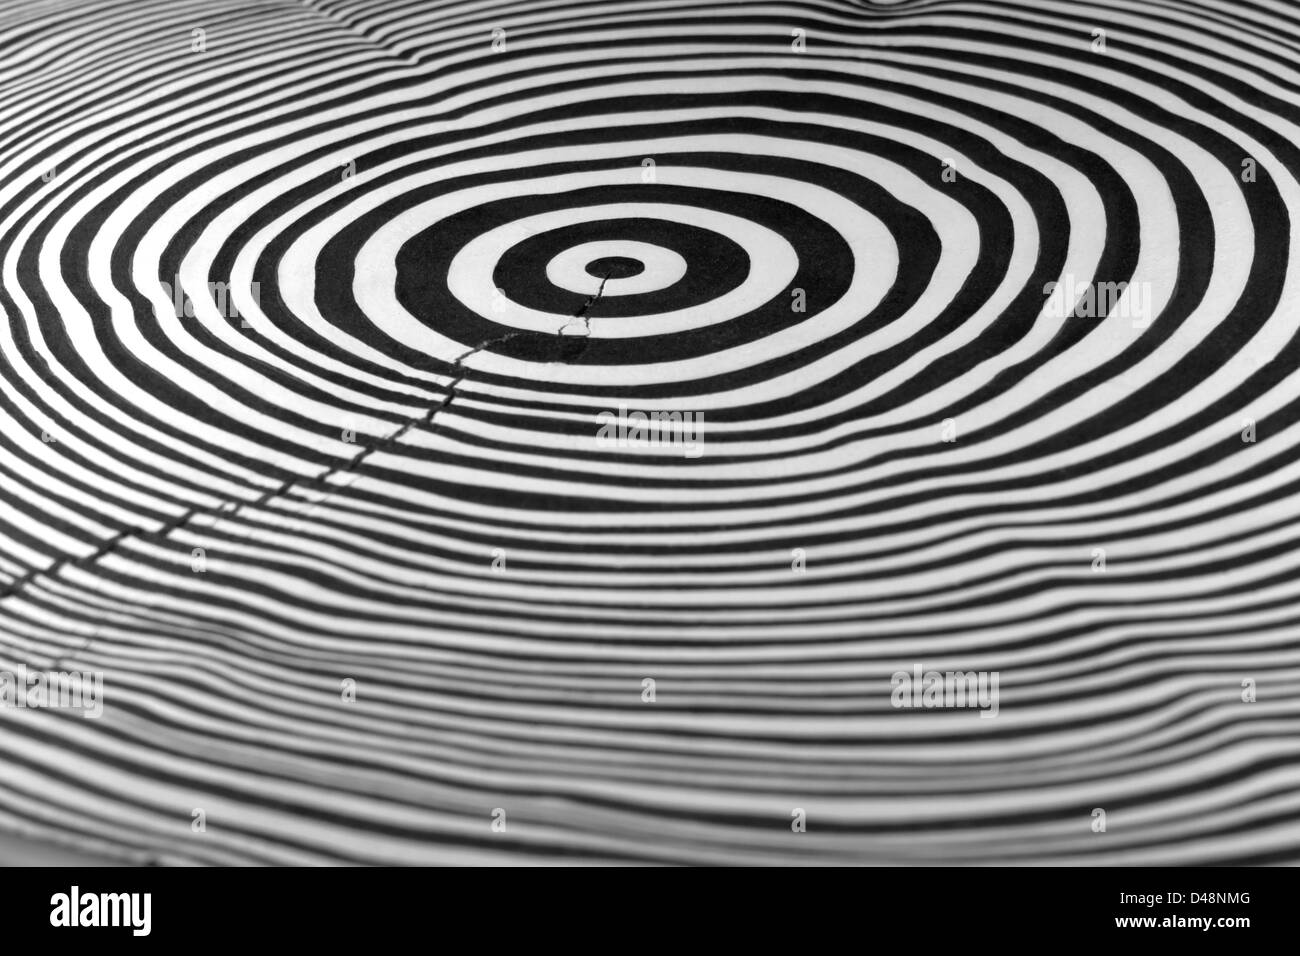 full frame abstract picture showing a piece of wood with black and white painted annual rings Stock Photo